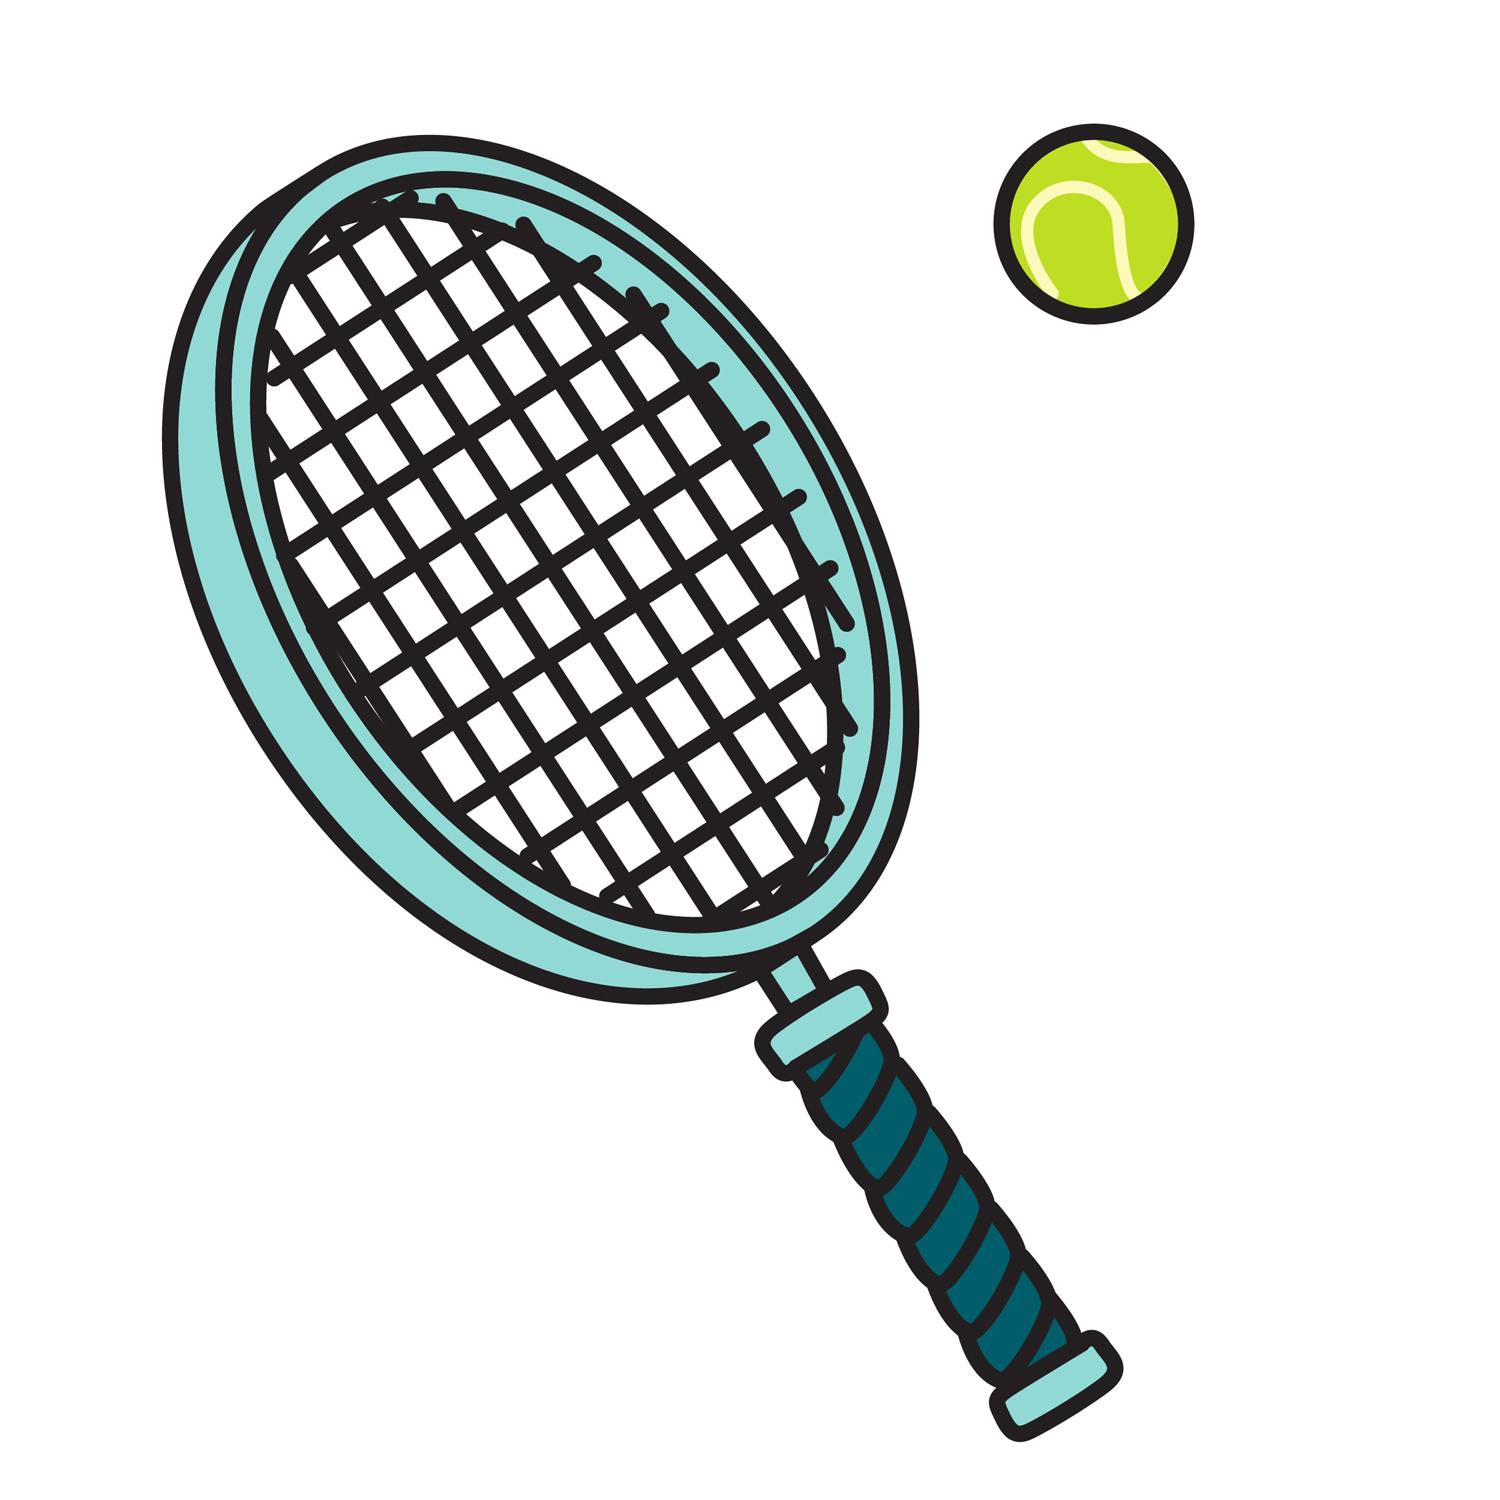 14 Tennis Racket And Ball Vector Images - Tennis Racket and Ball ...